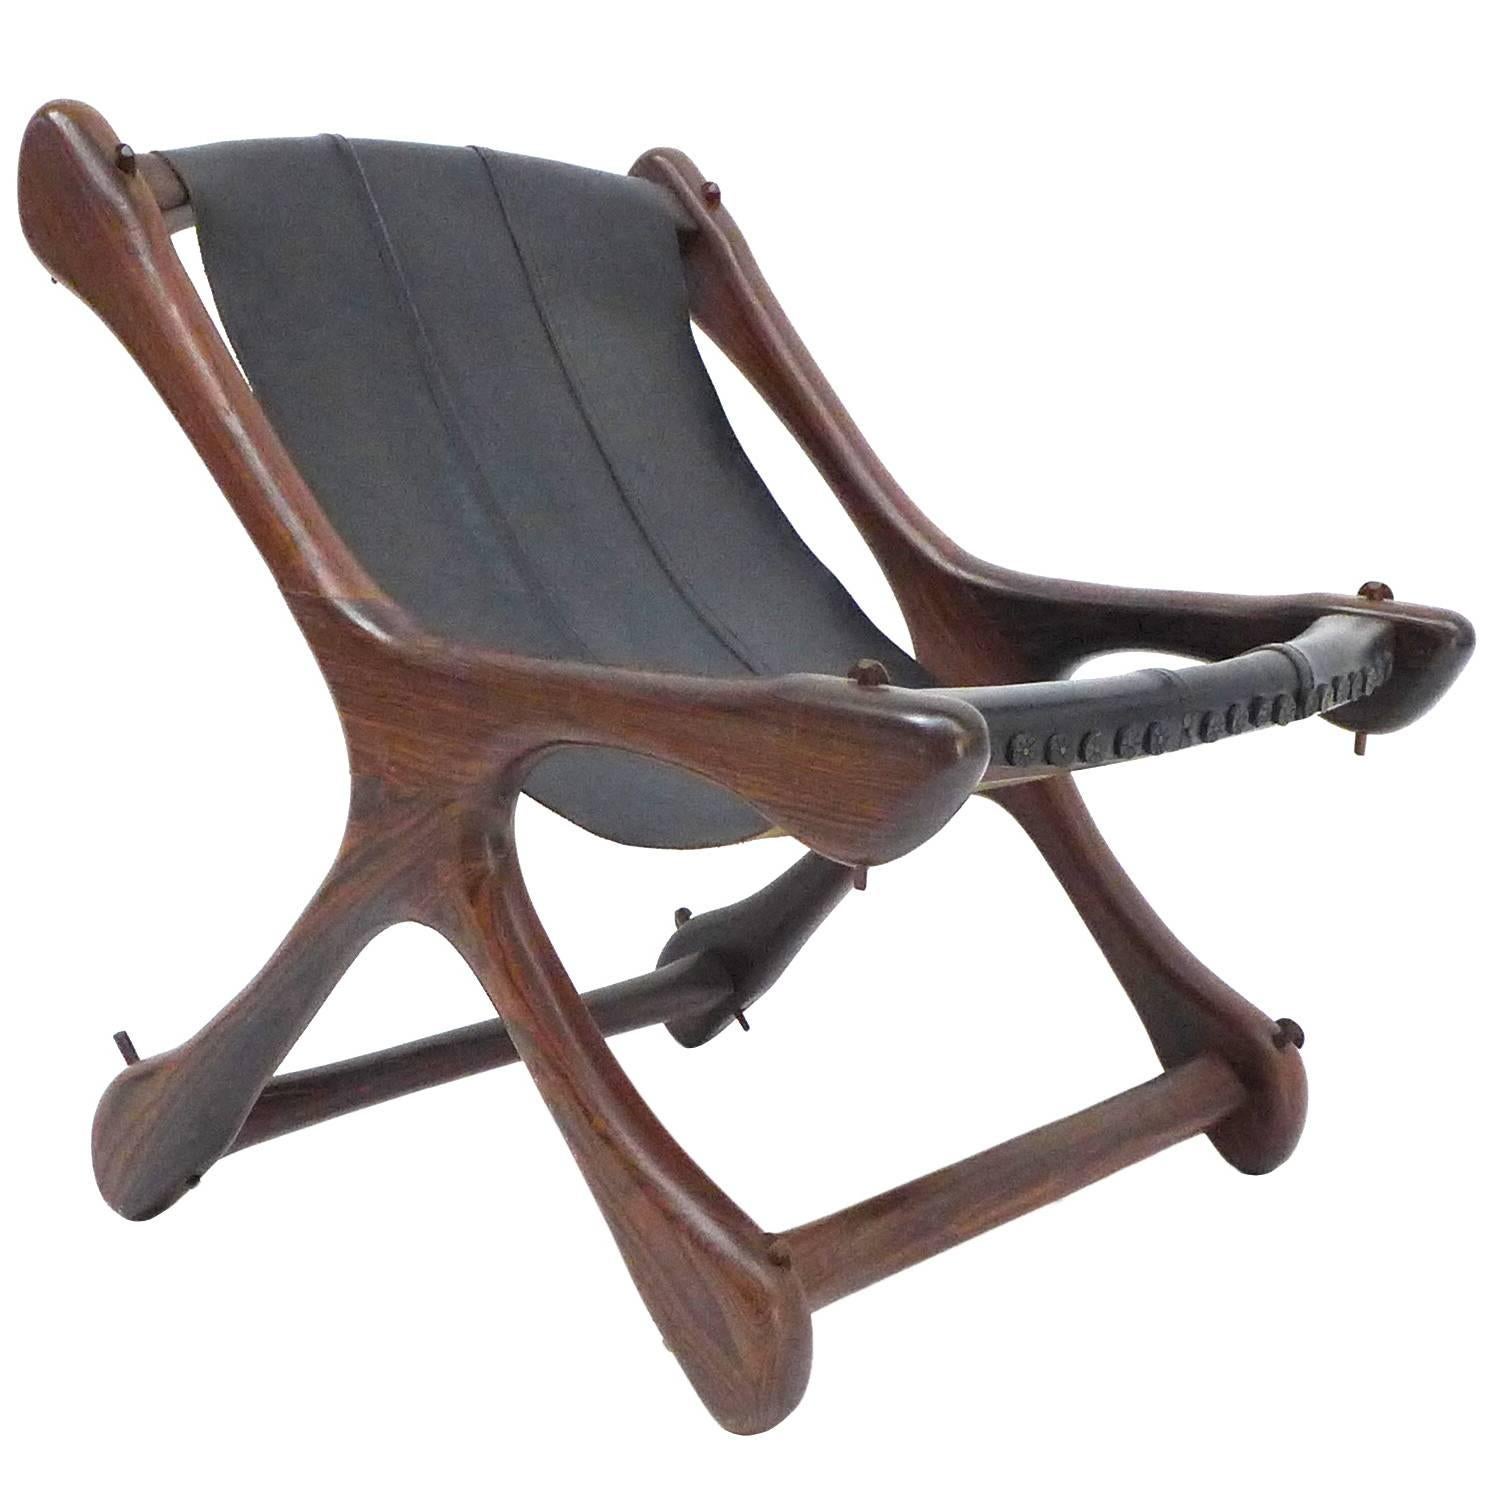 Sling "Sloucher" Chair by Don Shoemaker For Sale